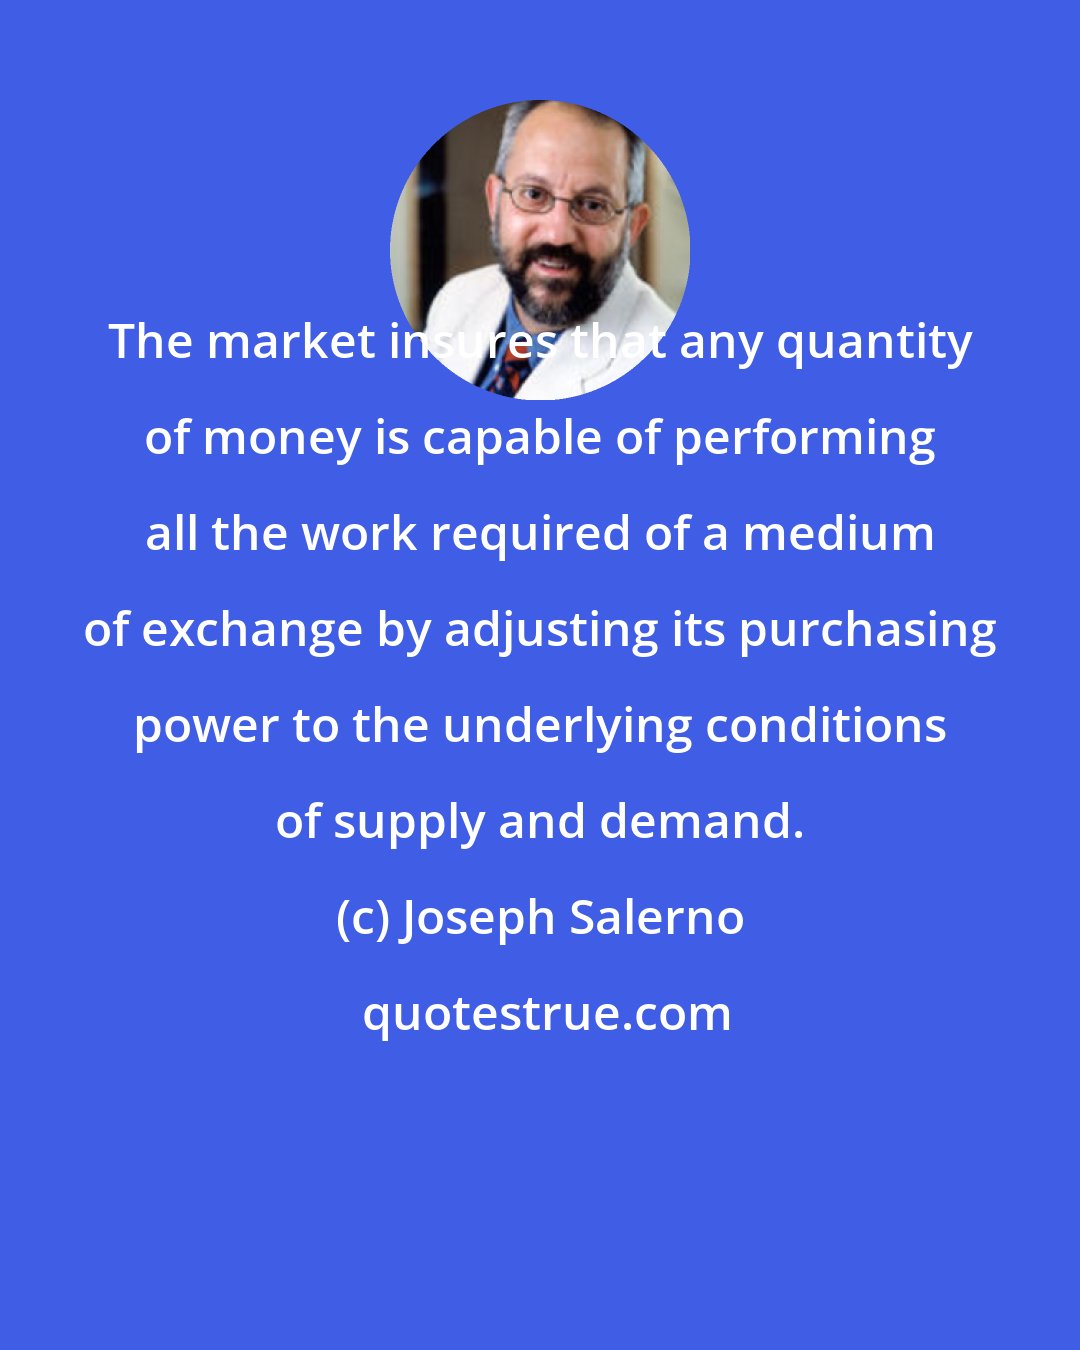 Joseph Salerno: The market insures that any quantity of money is capable of performing all the work required of a medium of exchange by adjusting its purchasing power to the underlying conditions of supply and demand.